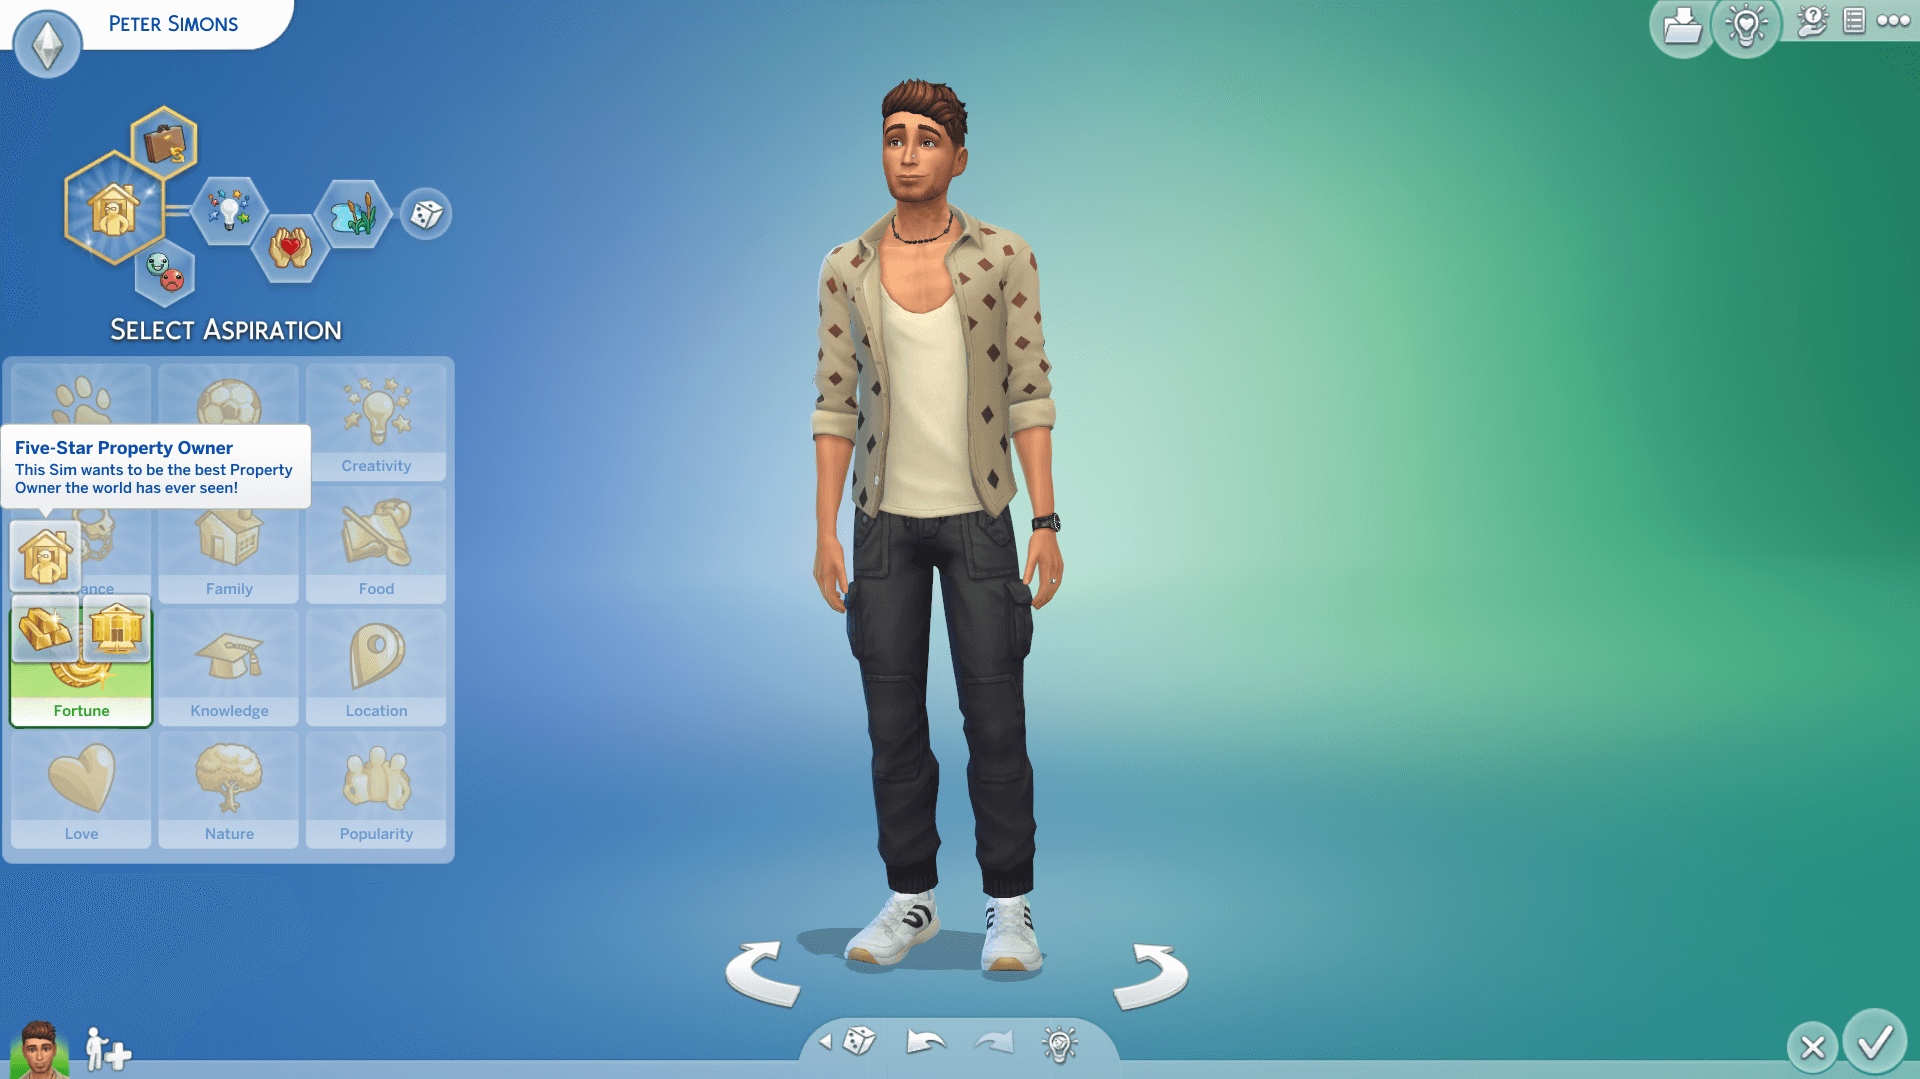 This picture shows a male sim in the middle, fully clothed in all new items from this expansion pack. To the left hand side, the cursor is over a new aspiration included with the expansion pack.